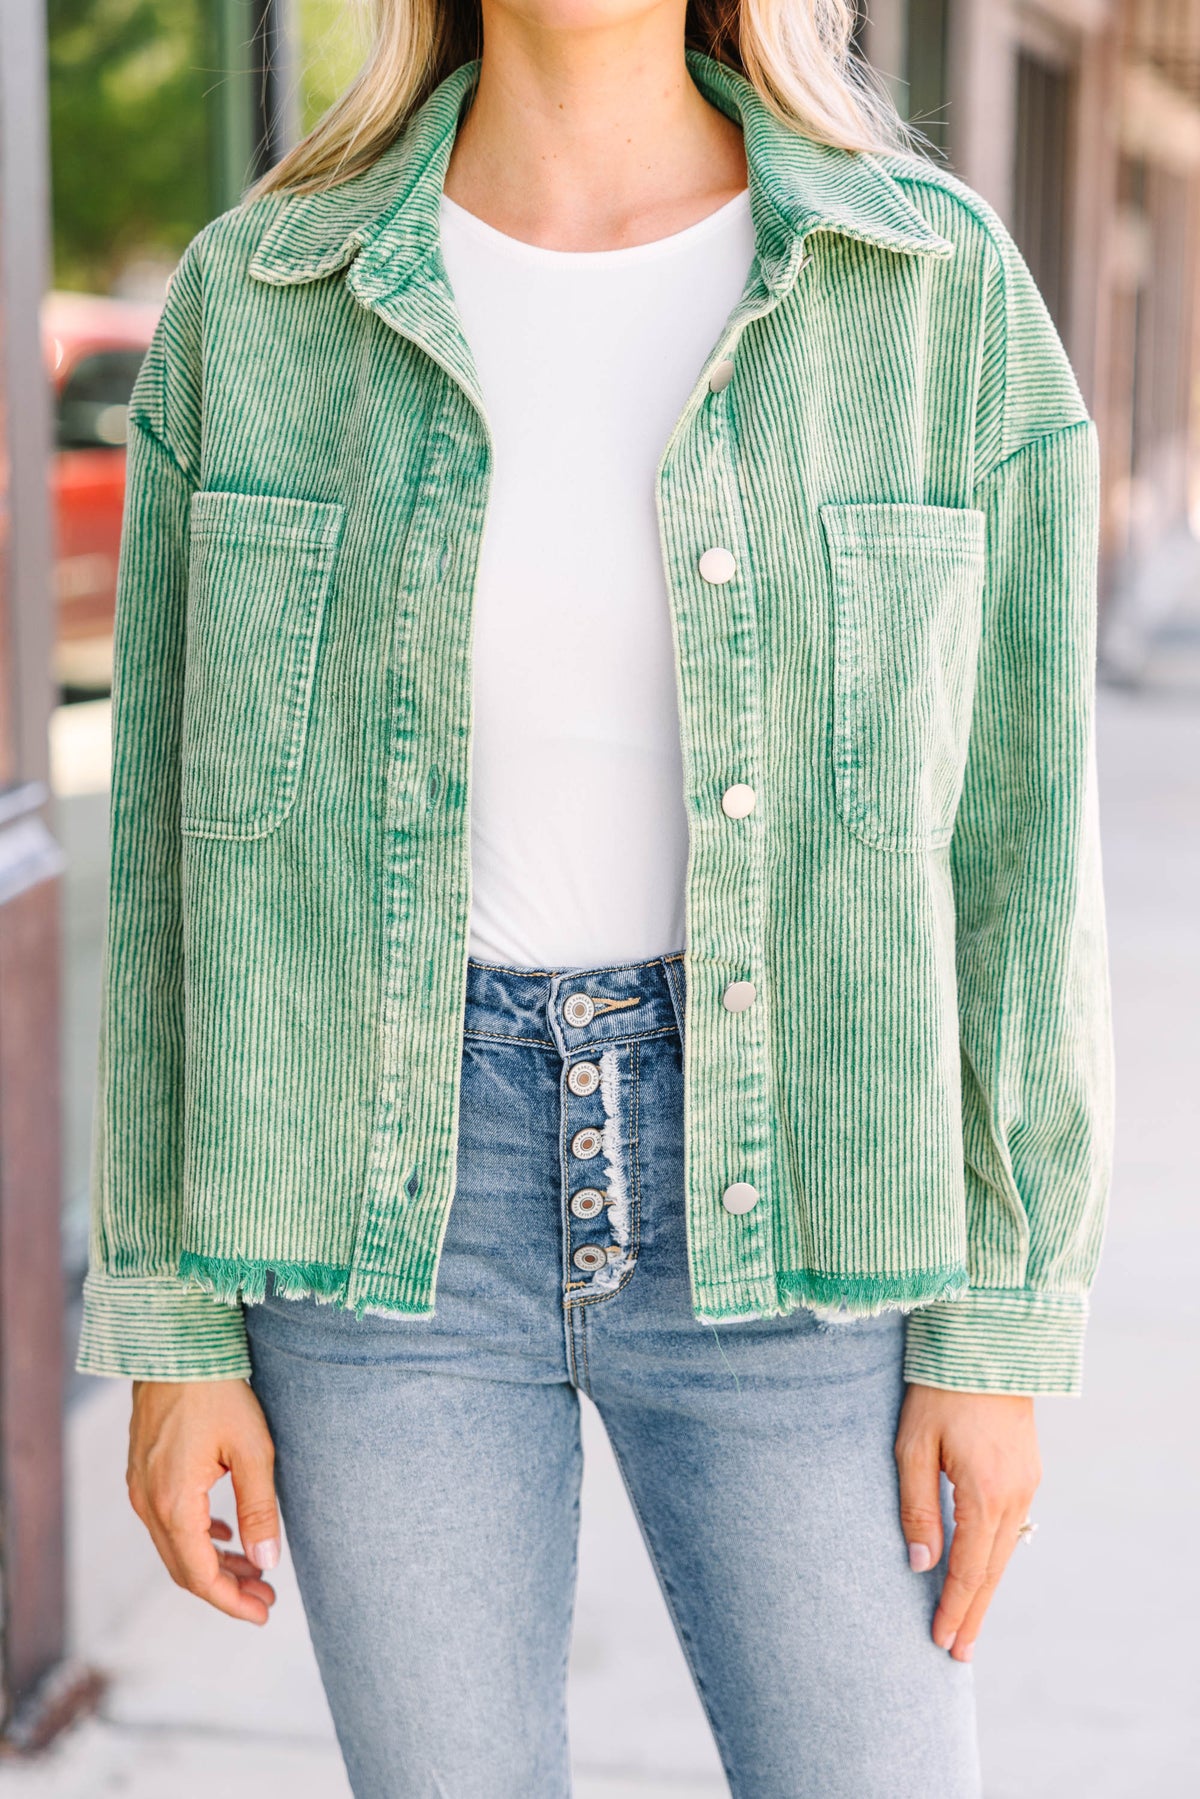 Better Than Ever Green Corduroy Jacket – Shop the Mint